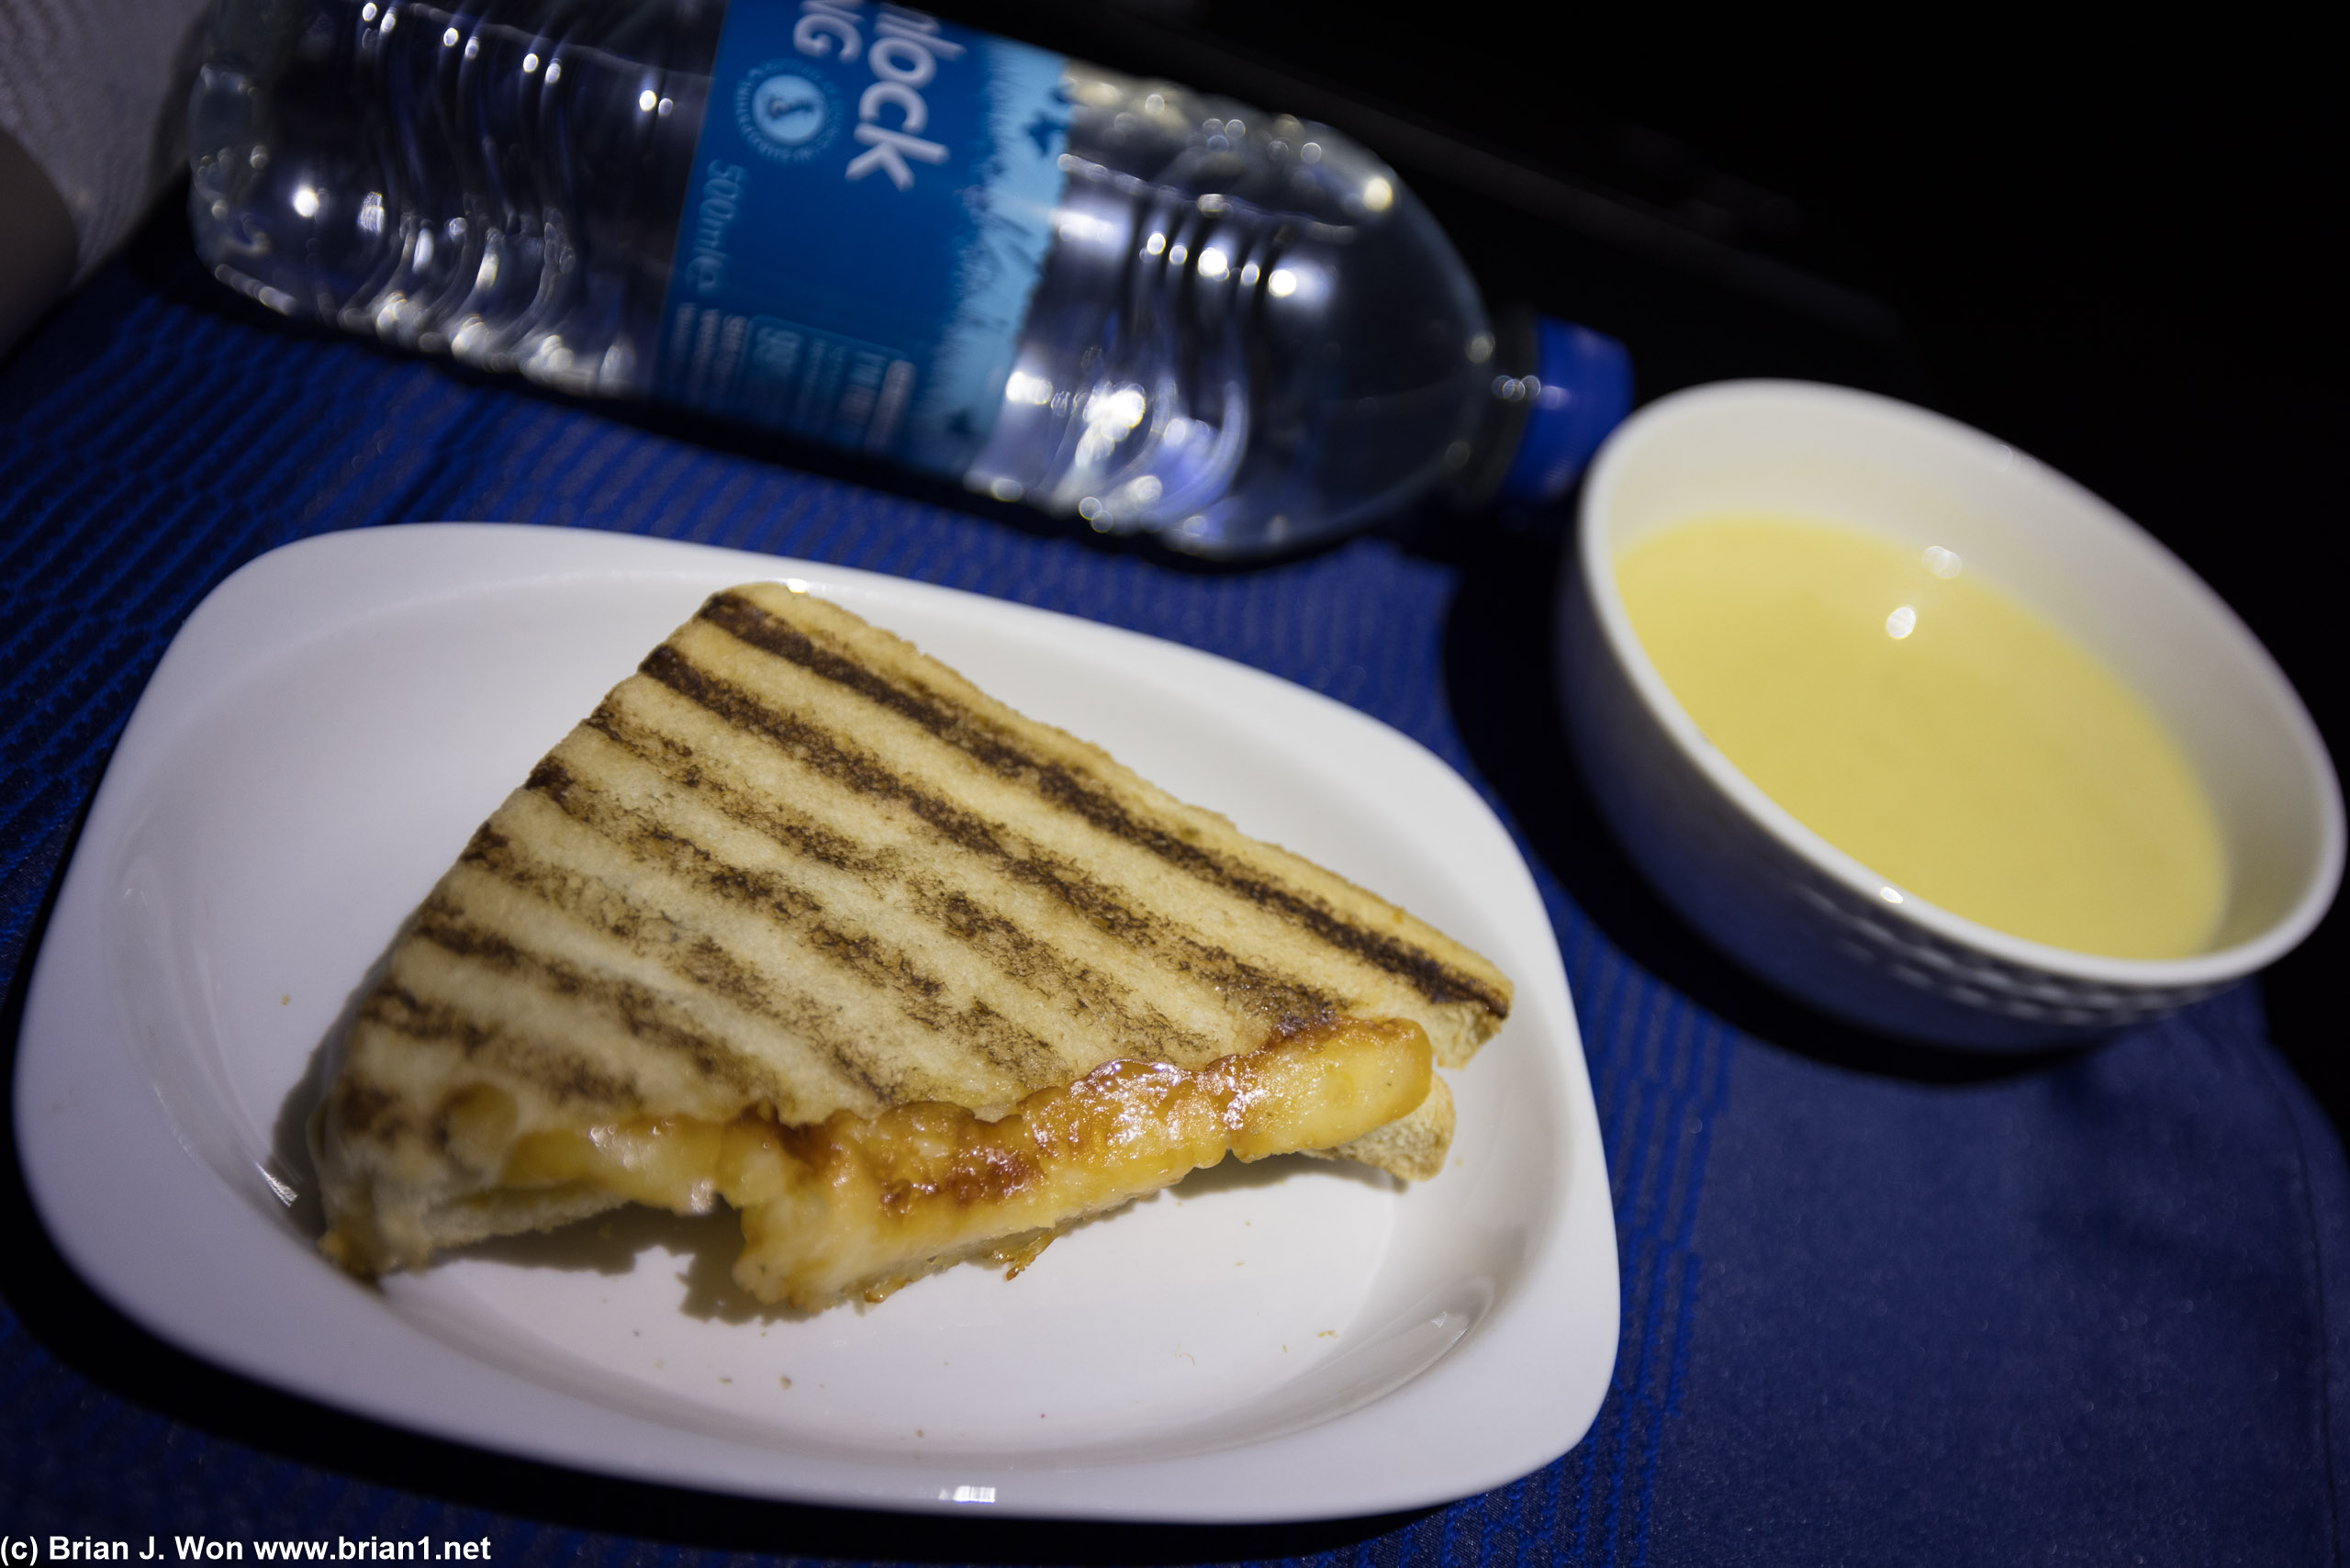 Mid-flight snack of celery soup and grilled cheese.